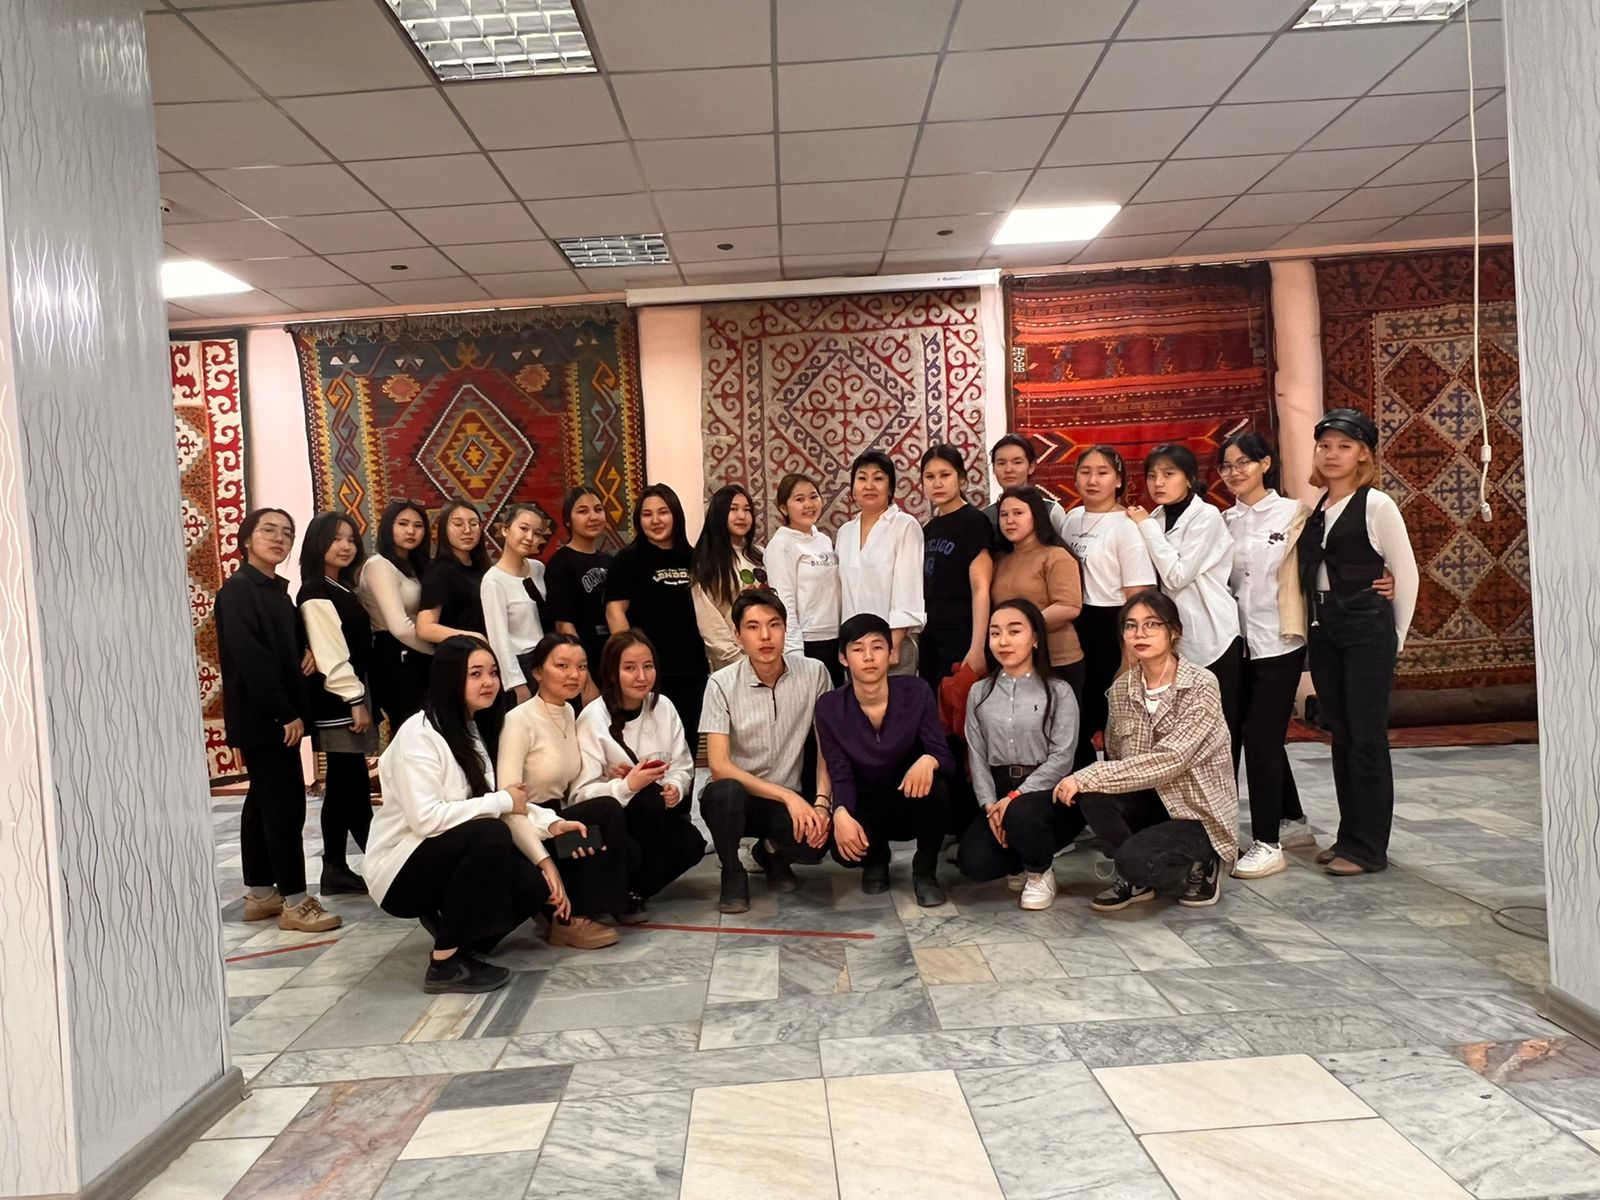 Since March 17, 2022, in the exhibition hall of the Zhezkazgan Historical and Archaeological Museum, students of the Zhezkazgan Higher Medical College have been showing interest in the exhibition of carpets stored in the funds of the museum 